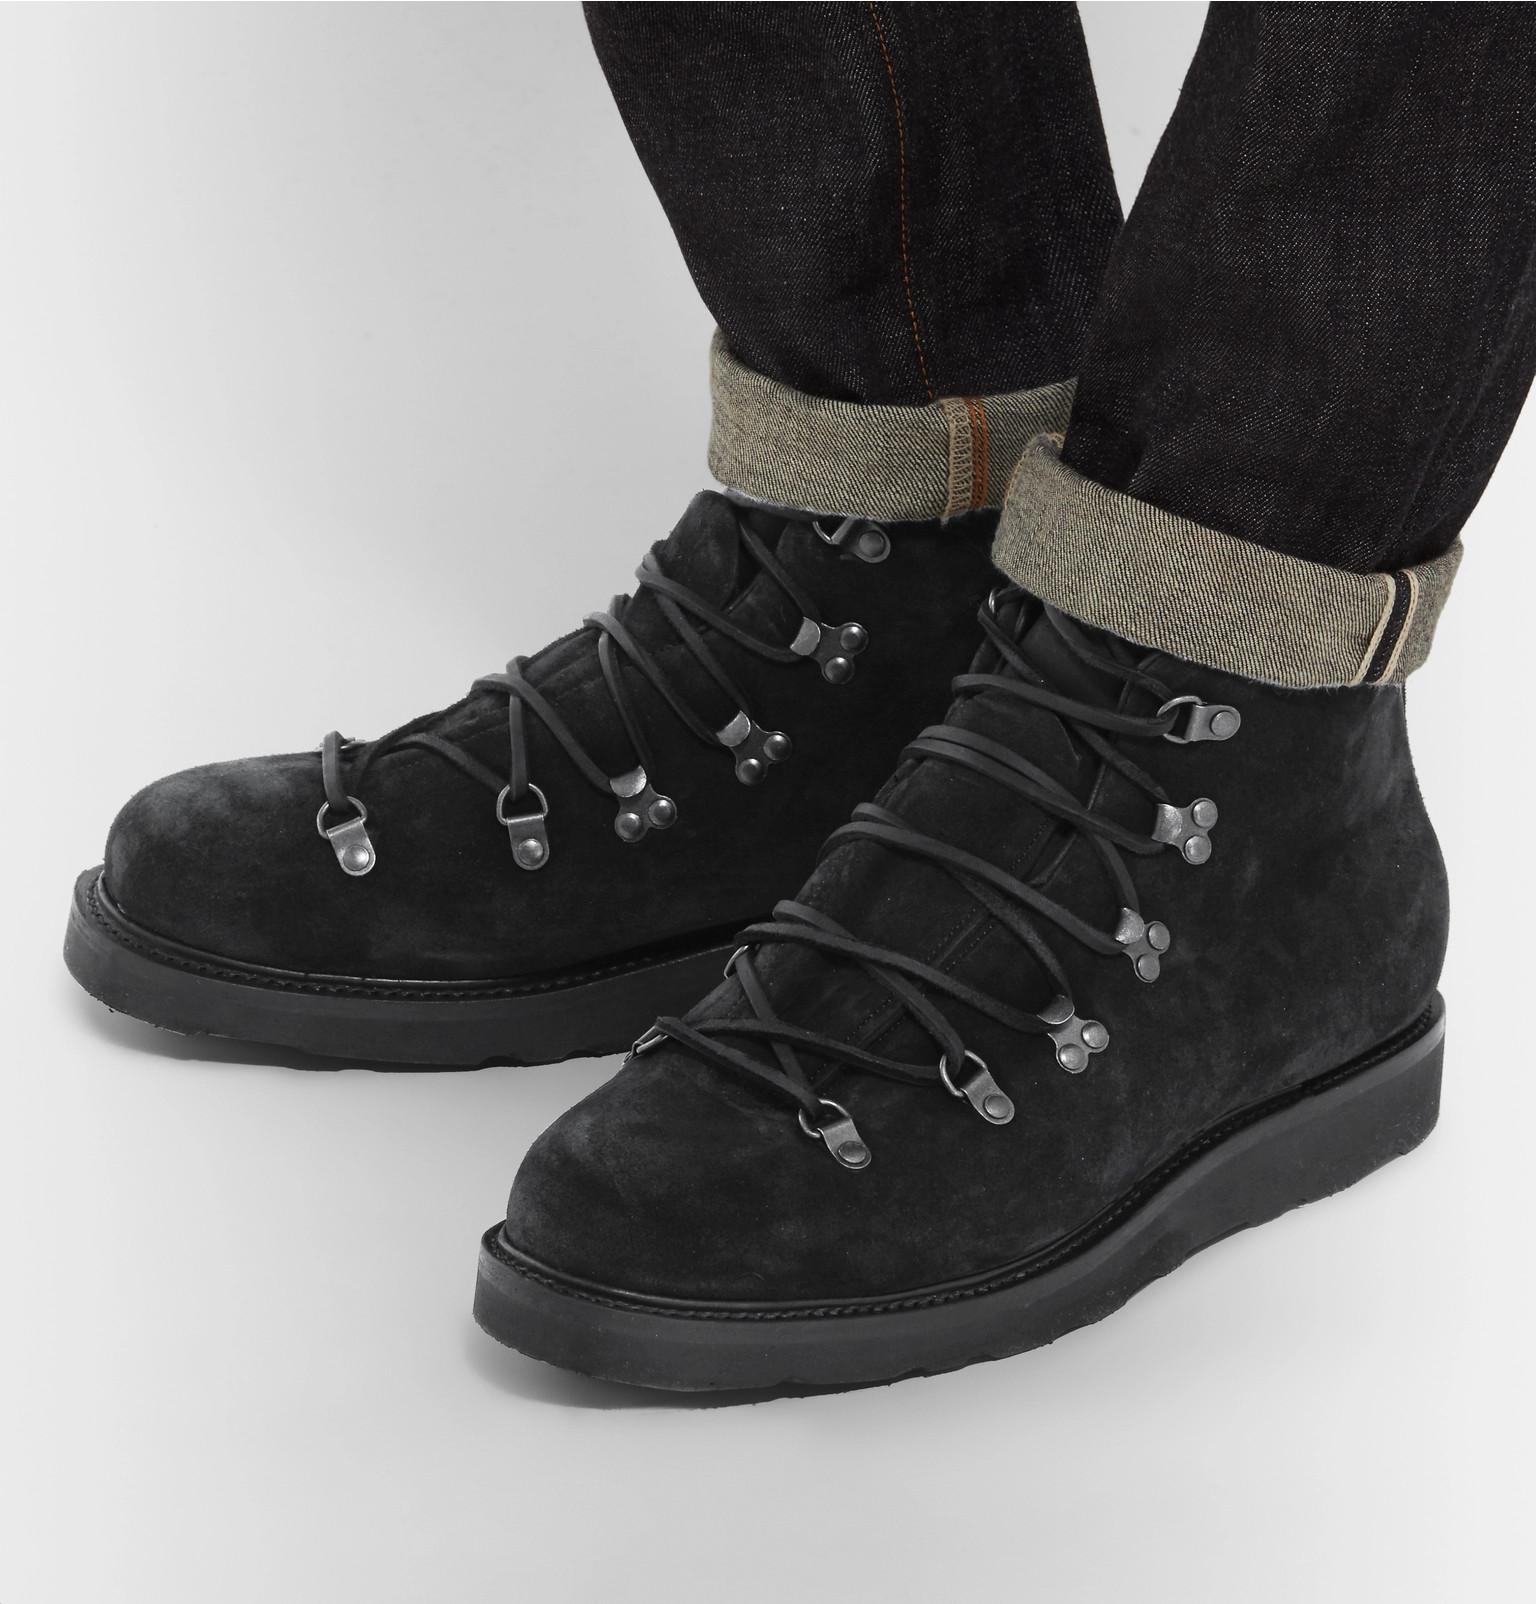 black suede hiking boots